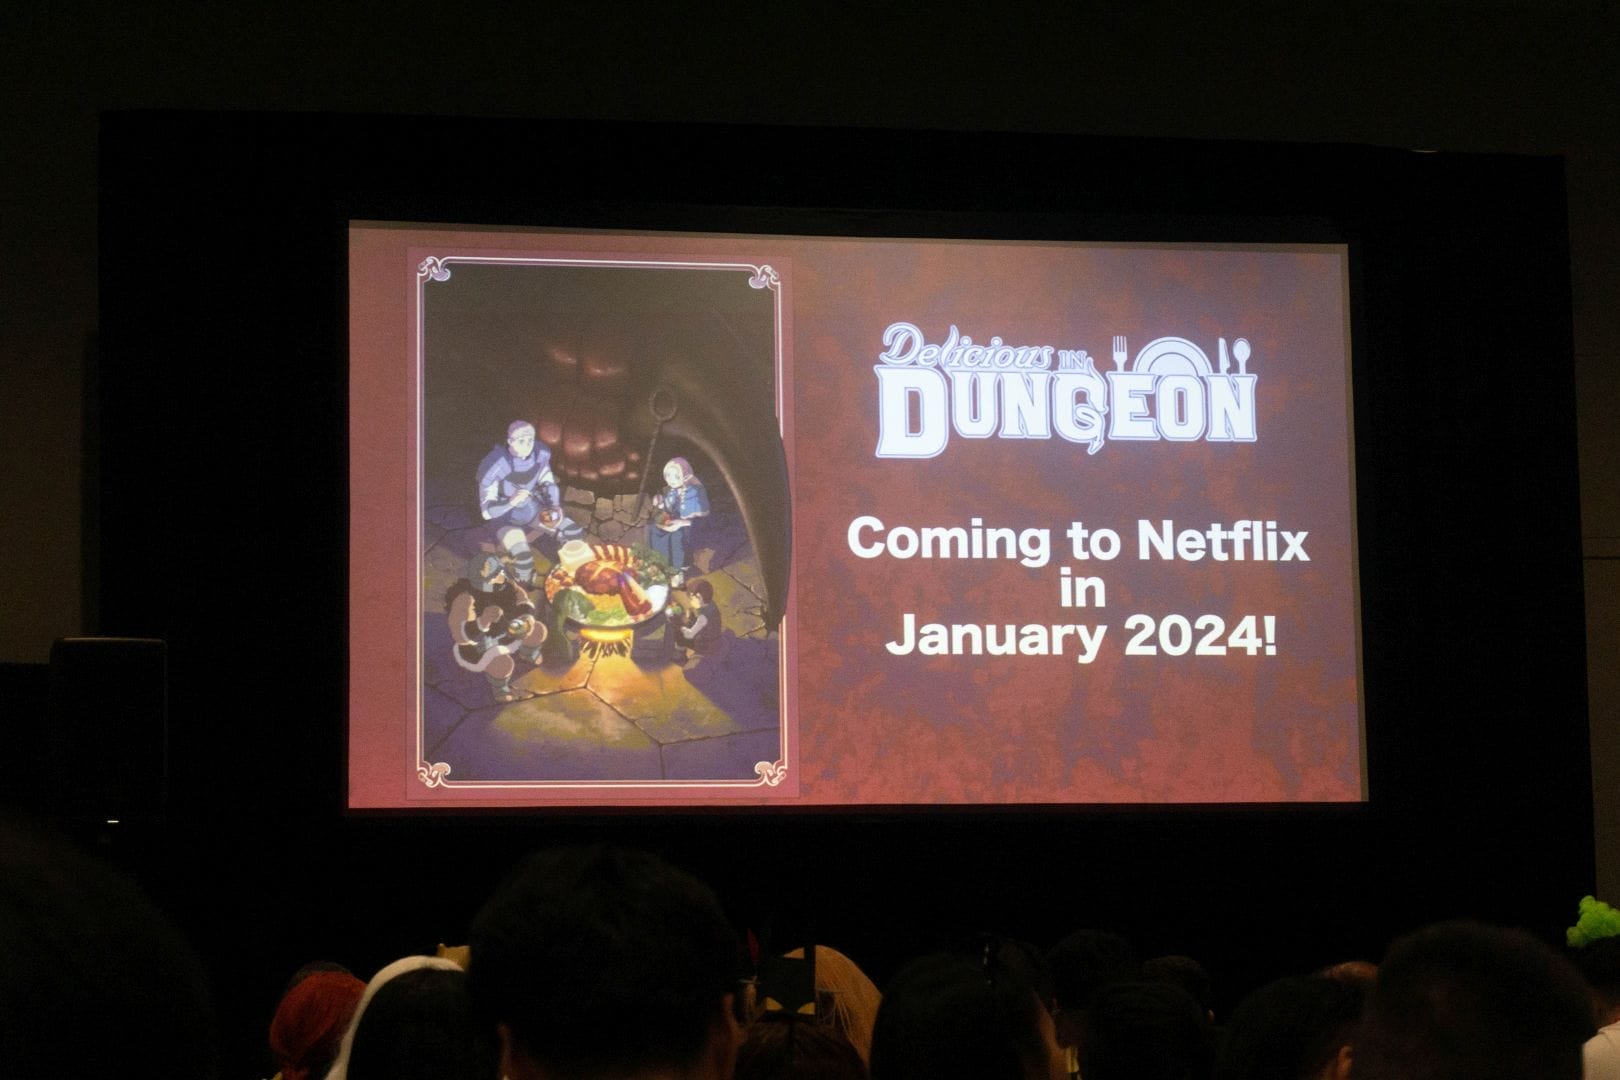 Photo from the Delicious In Dungeon premiere at Anime NYC, depicting a screen that features the show's key visual, along with the text "Delicious in Dungeon: Coming to Netflix in January 2024!"